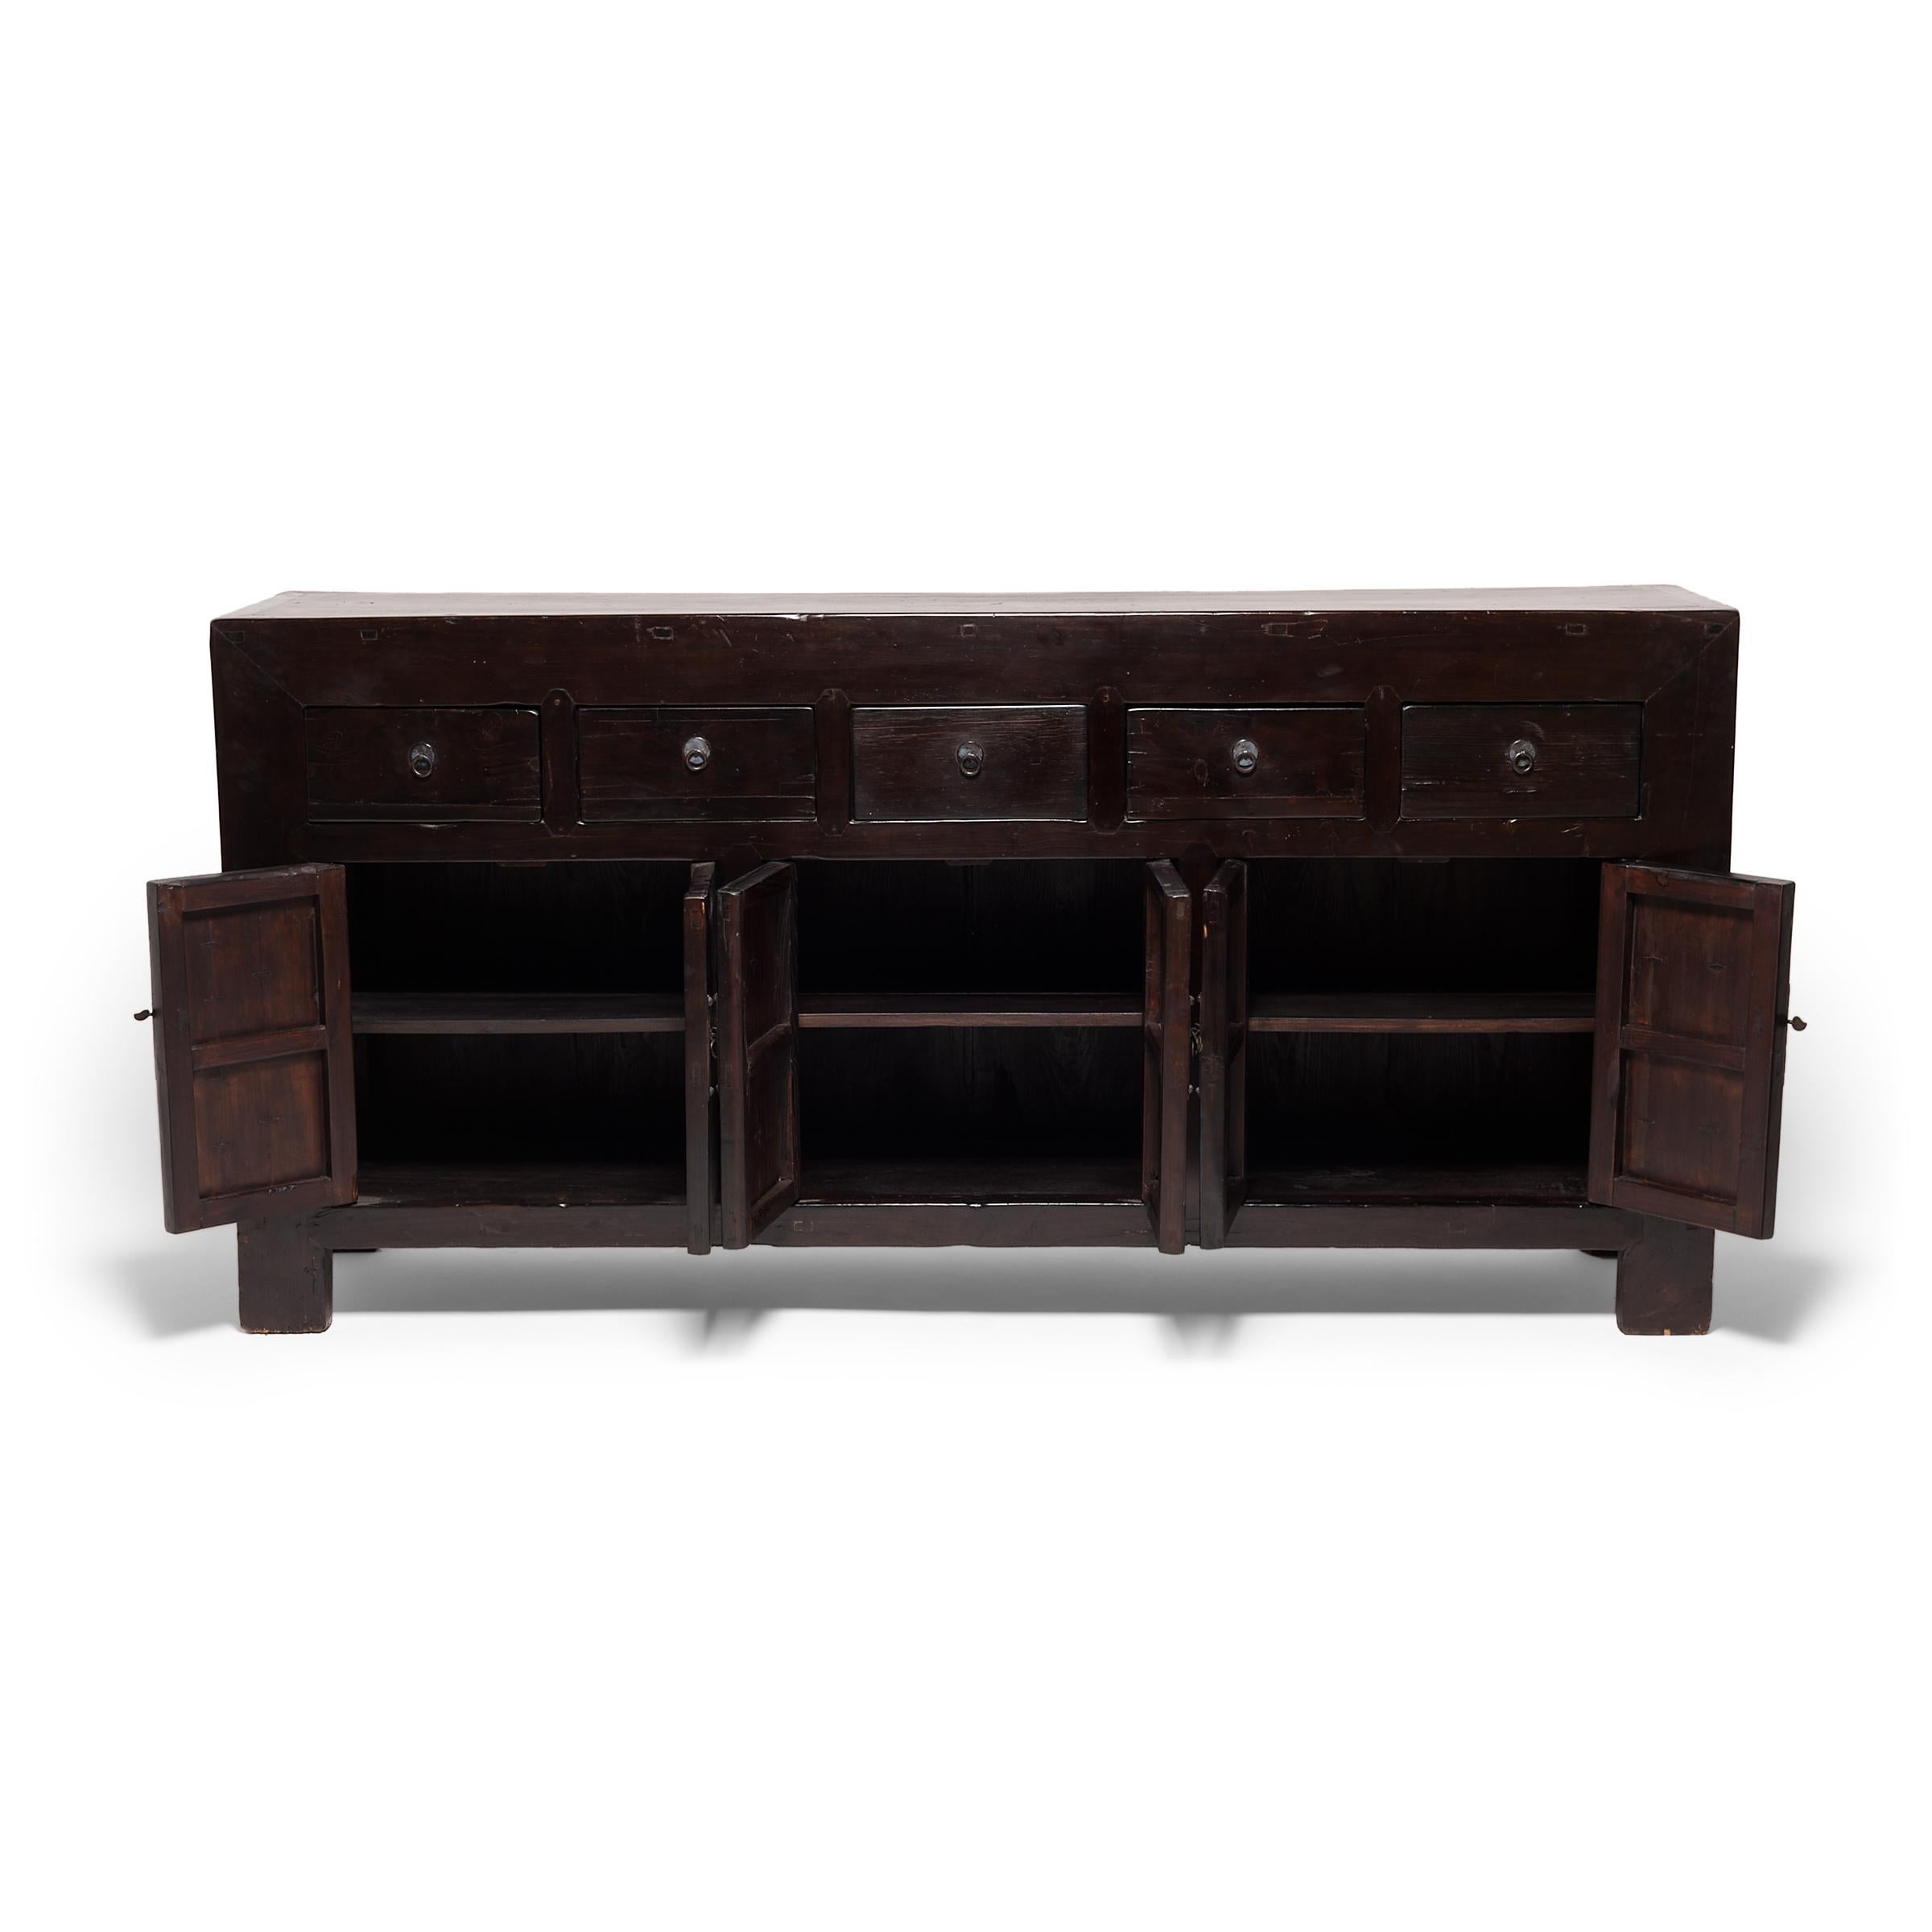 A skilled artisan of China's Shanxi province built this storage coffer, respecting the refined lines of Ming-dynasty furniture design by using traditional mortise and tenon joinery techniques. Its beautifully-worn finish shows years of use by the